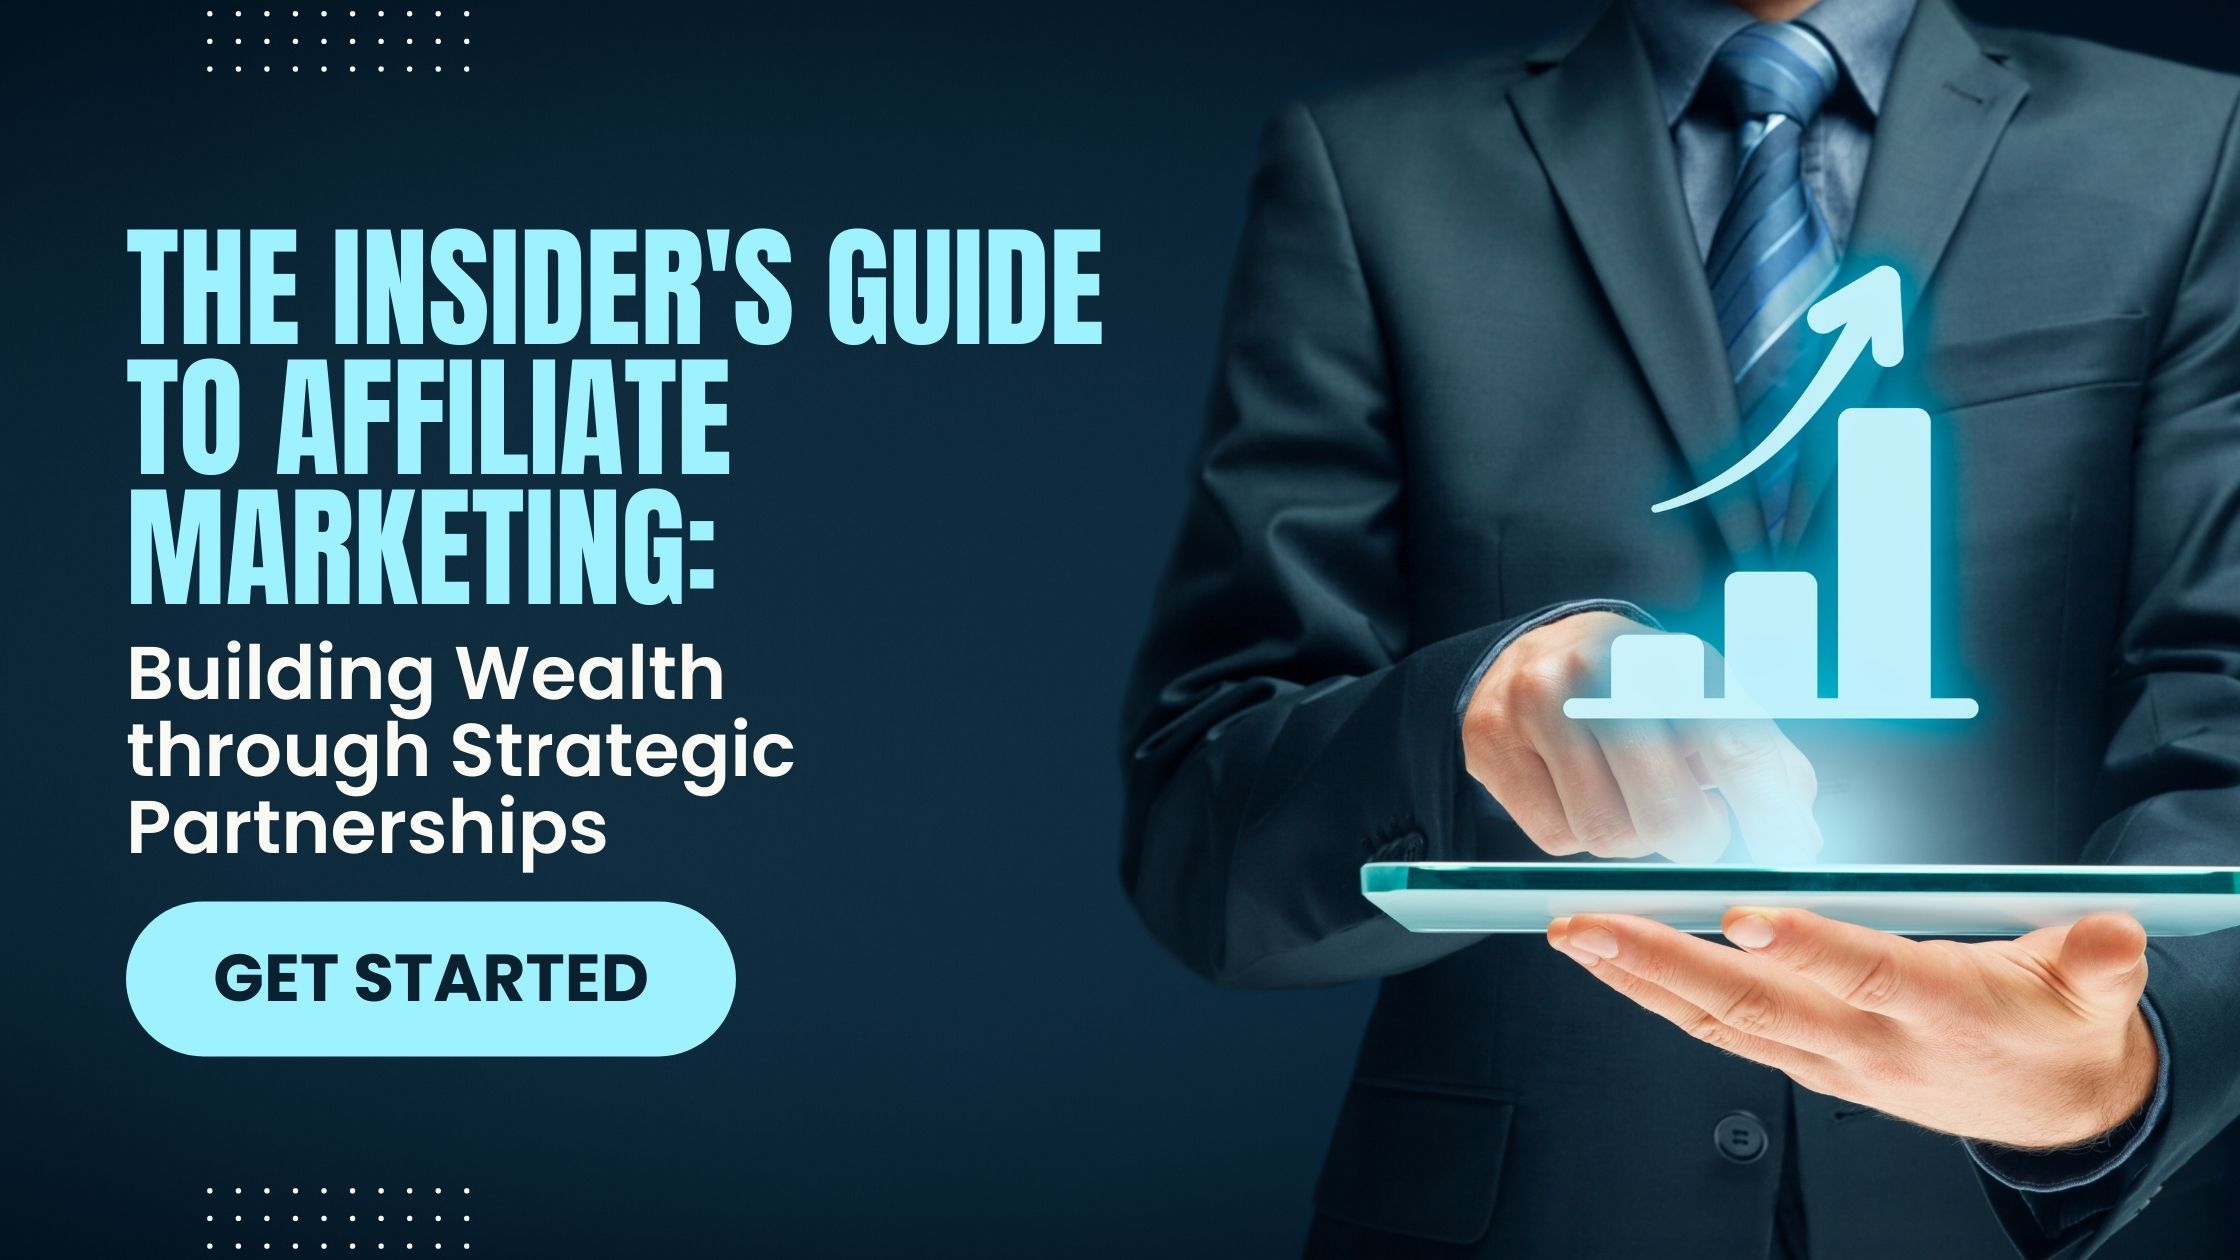 The Insider's Guide to Affiliate Marketing